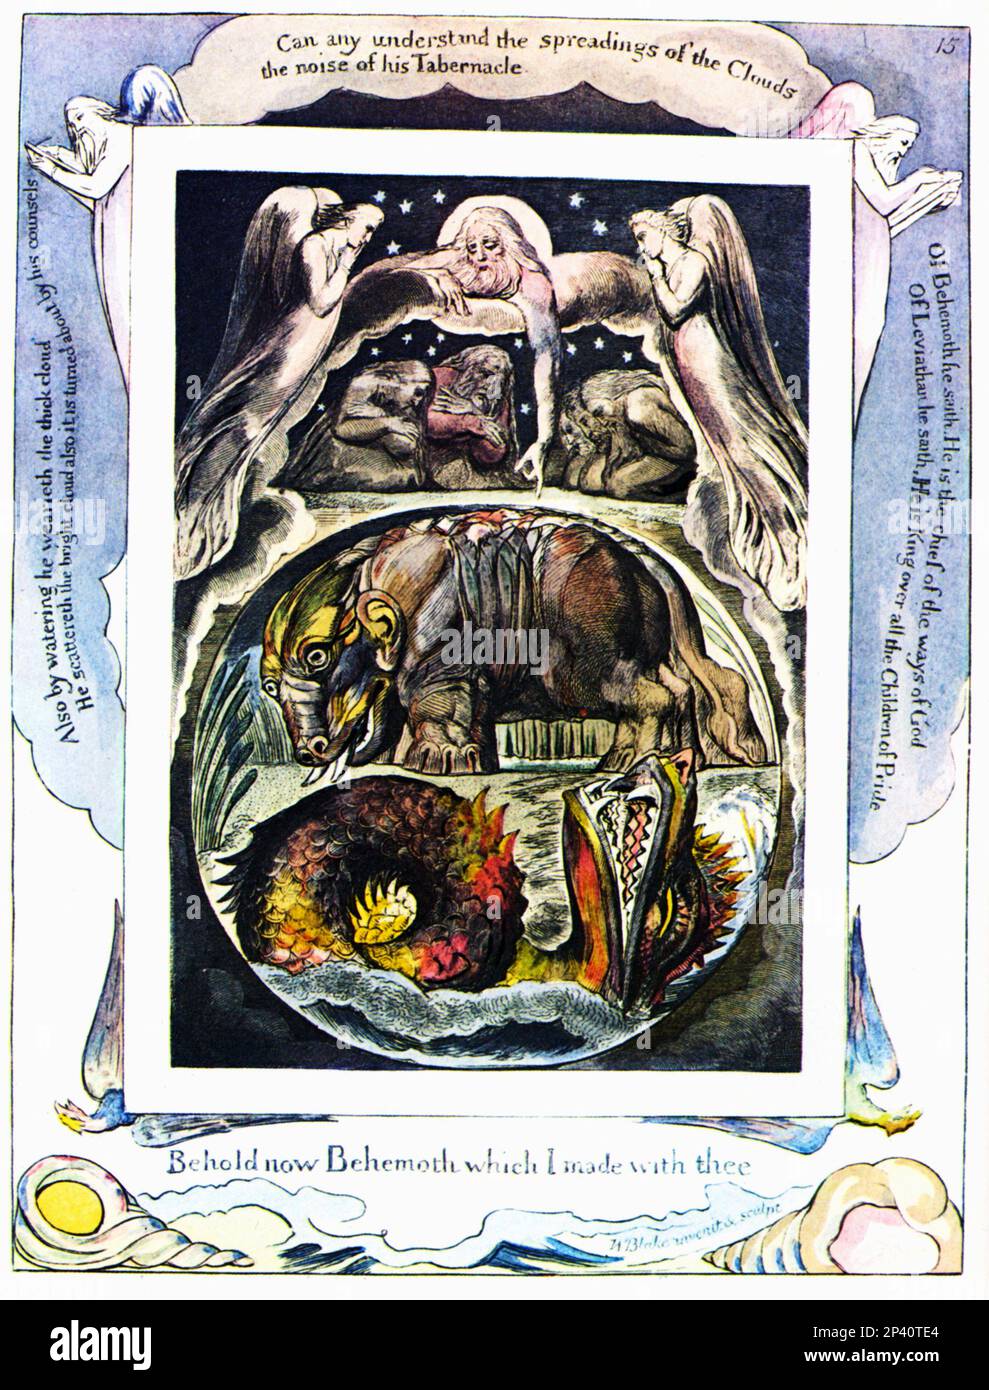 1825 : The british poet , painter and engraver WILLIAM BLAKE ( London 1757 - 1827 ) , from the Book of Hiob , the Behemoth and Leviathan  - POETA maledetto - maudit - POESIA - POETRY - letteratura - letterato - literature - SIMBOLISMO - SYMBOLISM - incisione - Dio - God - Giobbe - BIBBIA - BIBLE  ----  Archivio GBB Stock Photo